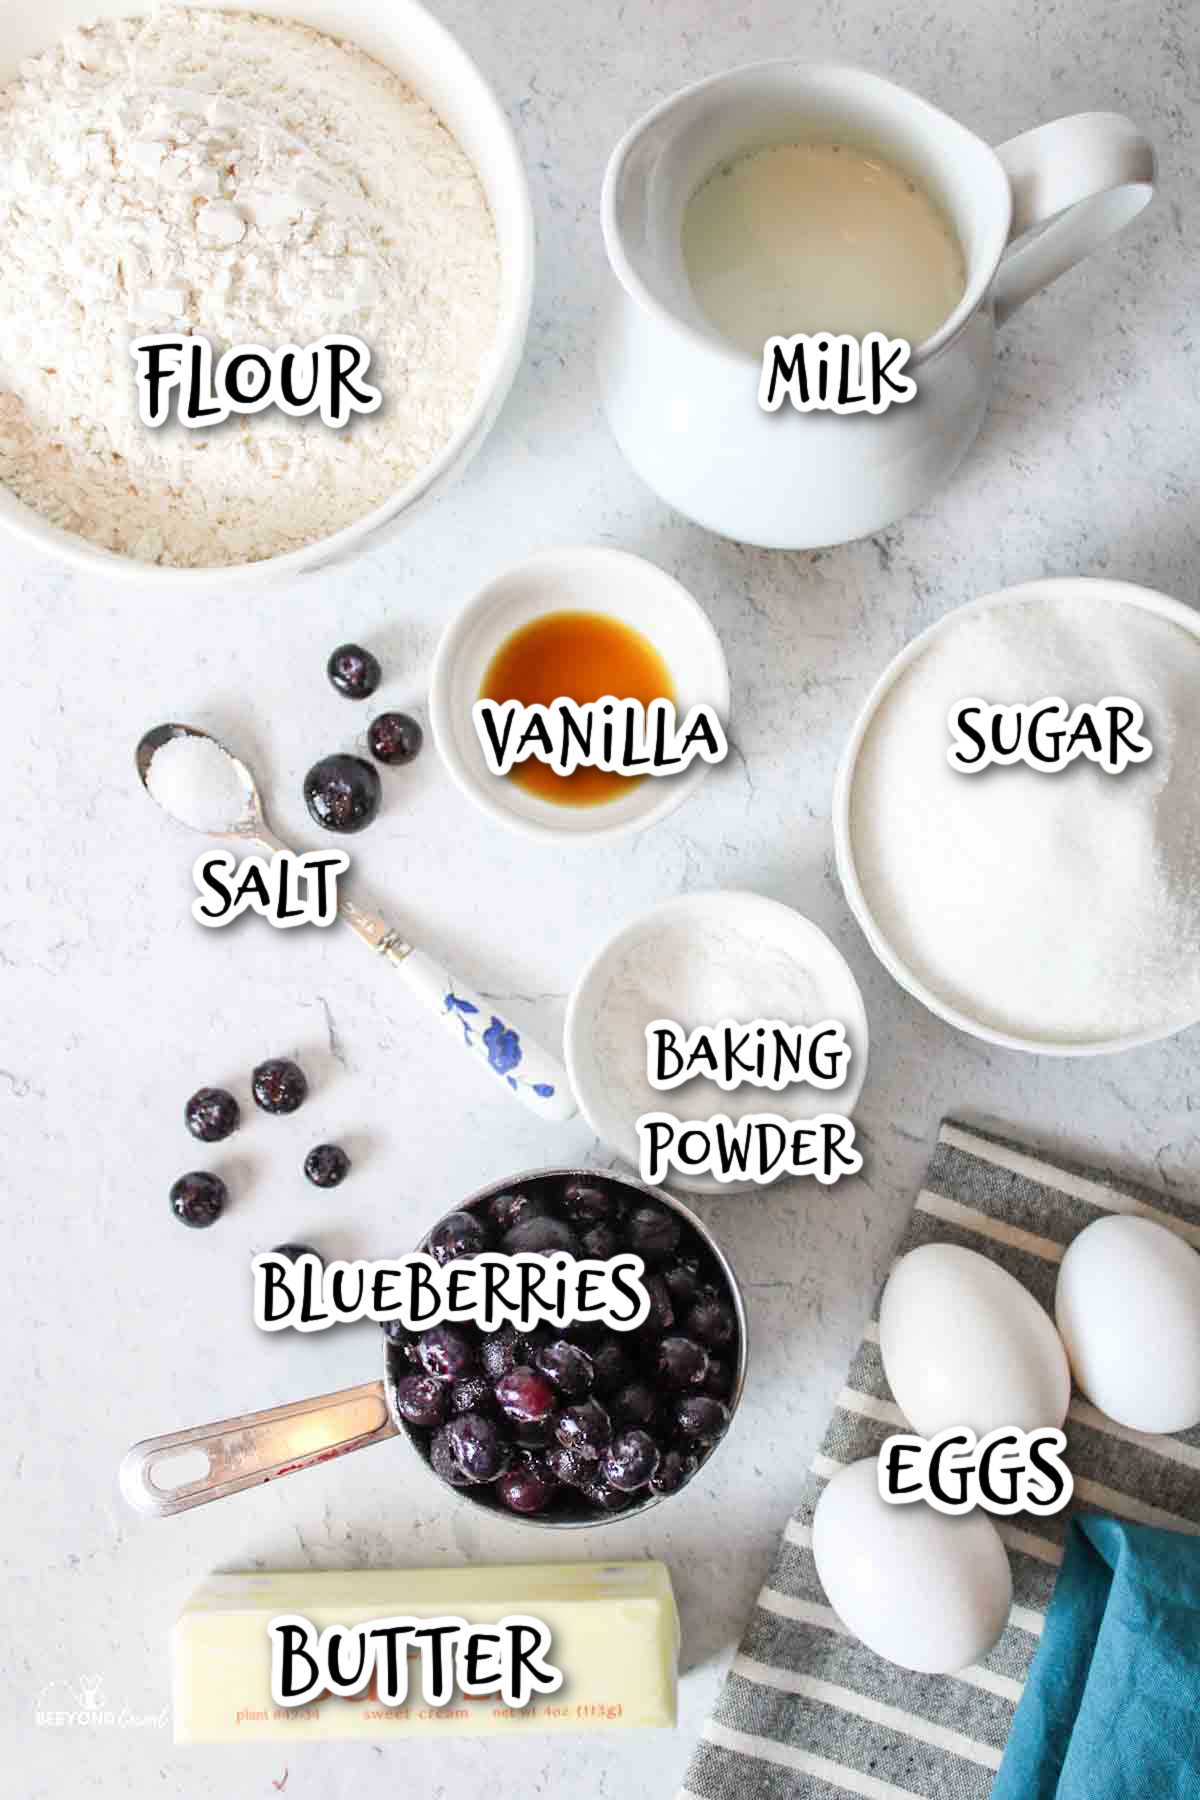 ingredients needed to make blueberry muffins from scratch.